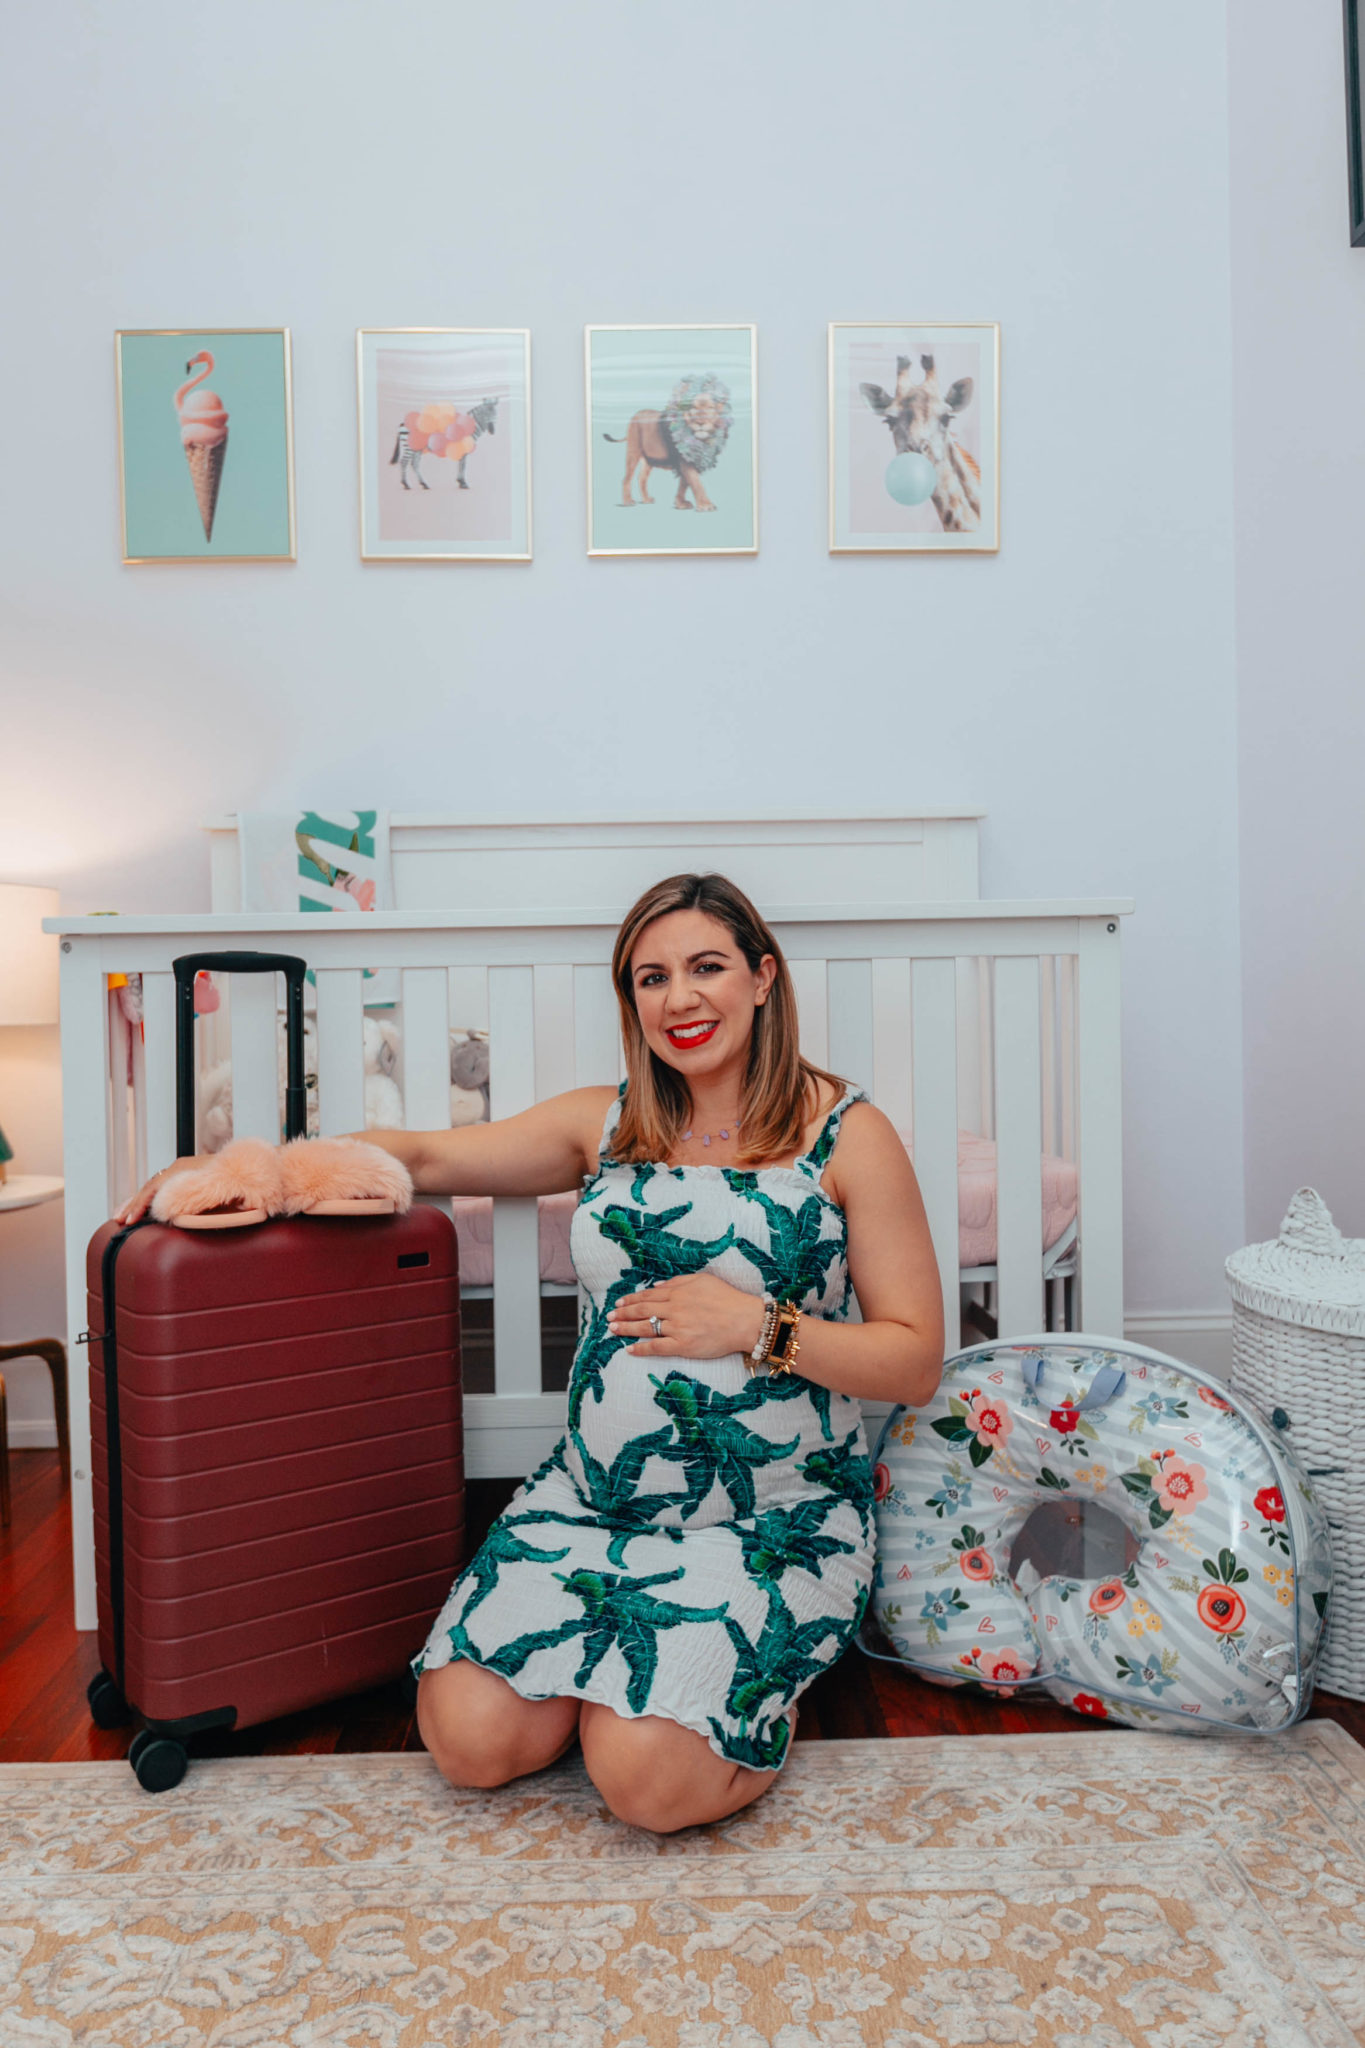 My Hospital Bag Essentials: What I Actually Used by popular Chicago lifestyle blog, Glass of Glam: image of a woman kneeling on the ground in her baby nursery next to a Boppy pillow and a rolling suitcase.